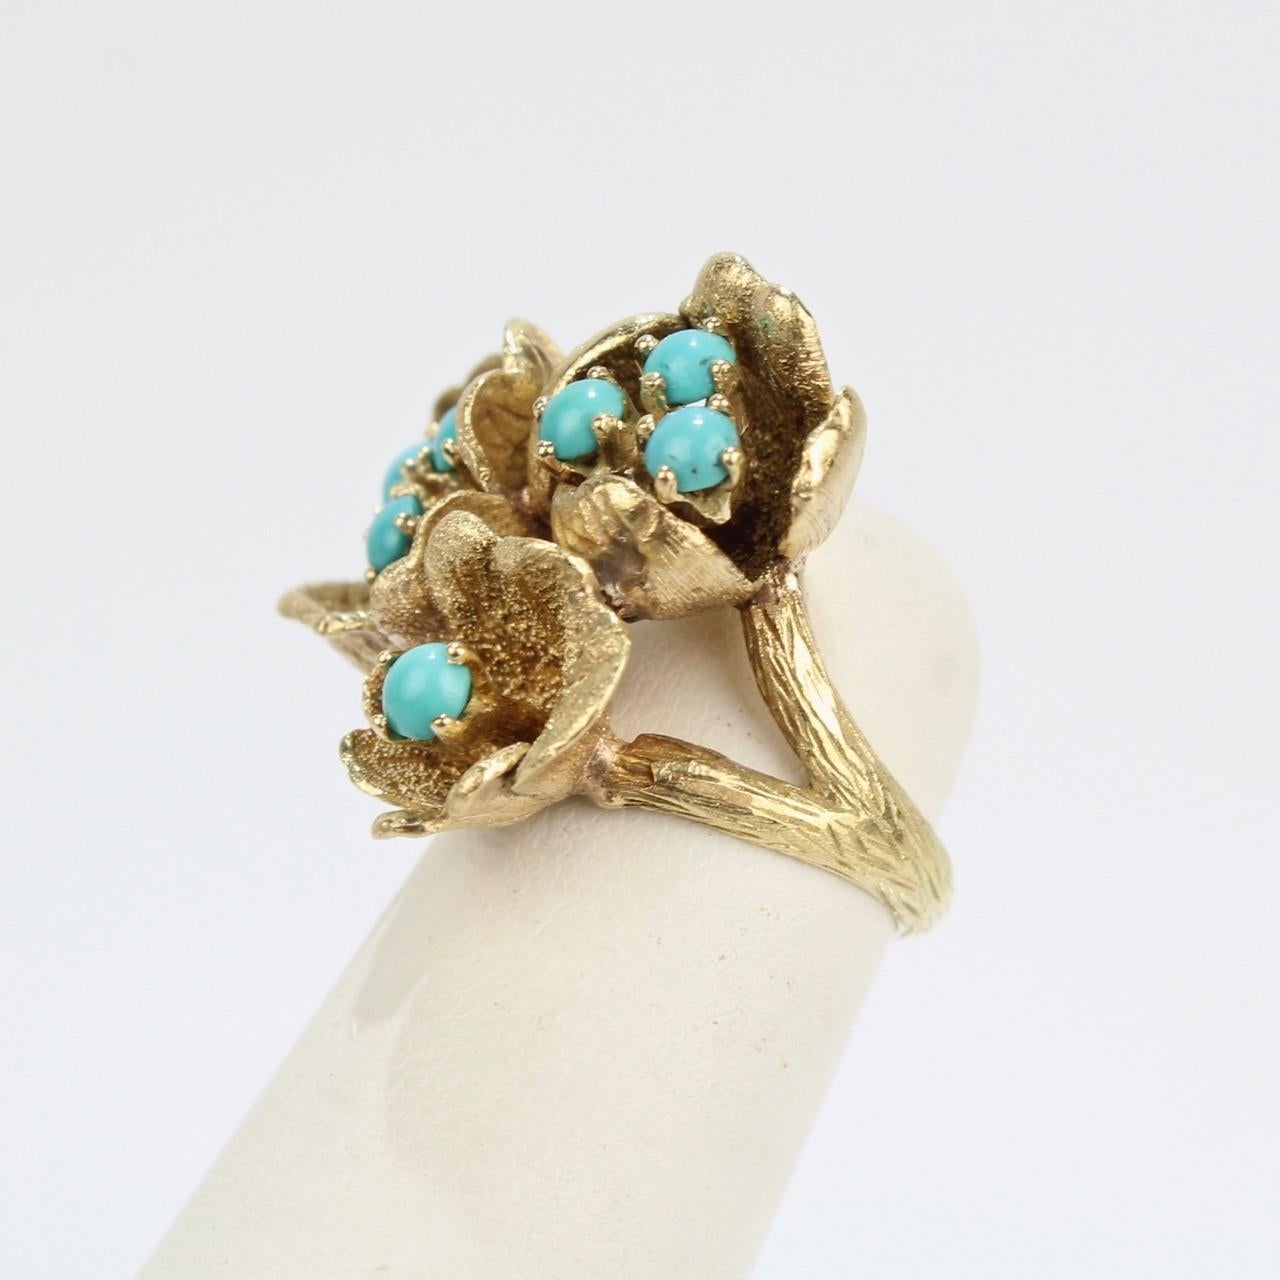 A fine J. Rossi 18K gold and turquoise ring with delicate gold flower blossoms.

The ring has textured gold that forms figural leaves, petals surrounding turquoise beads, and a 'twig' shank. 

The posts holding the beads move just a little and allow